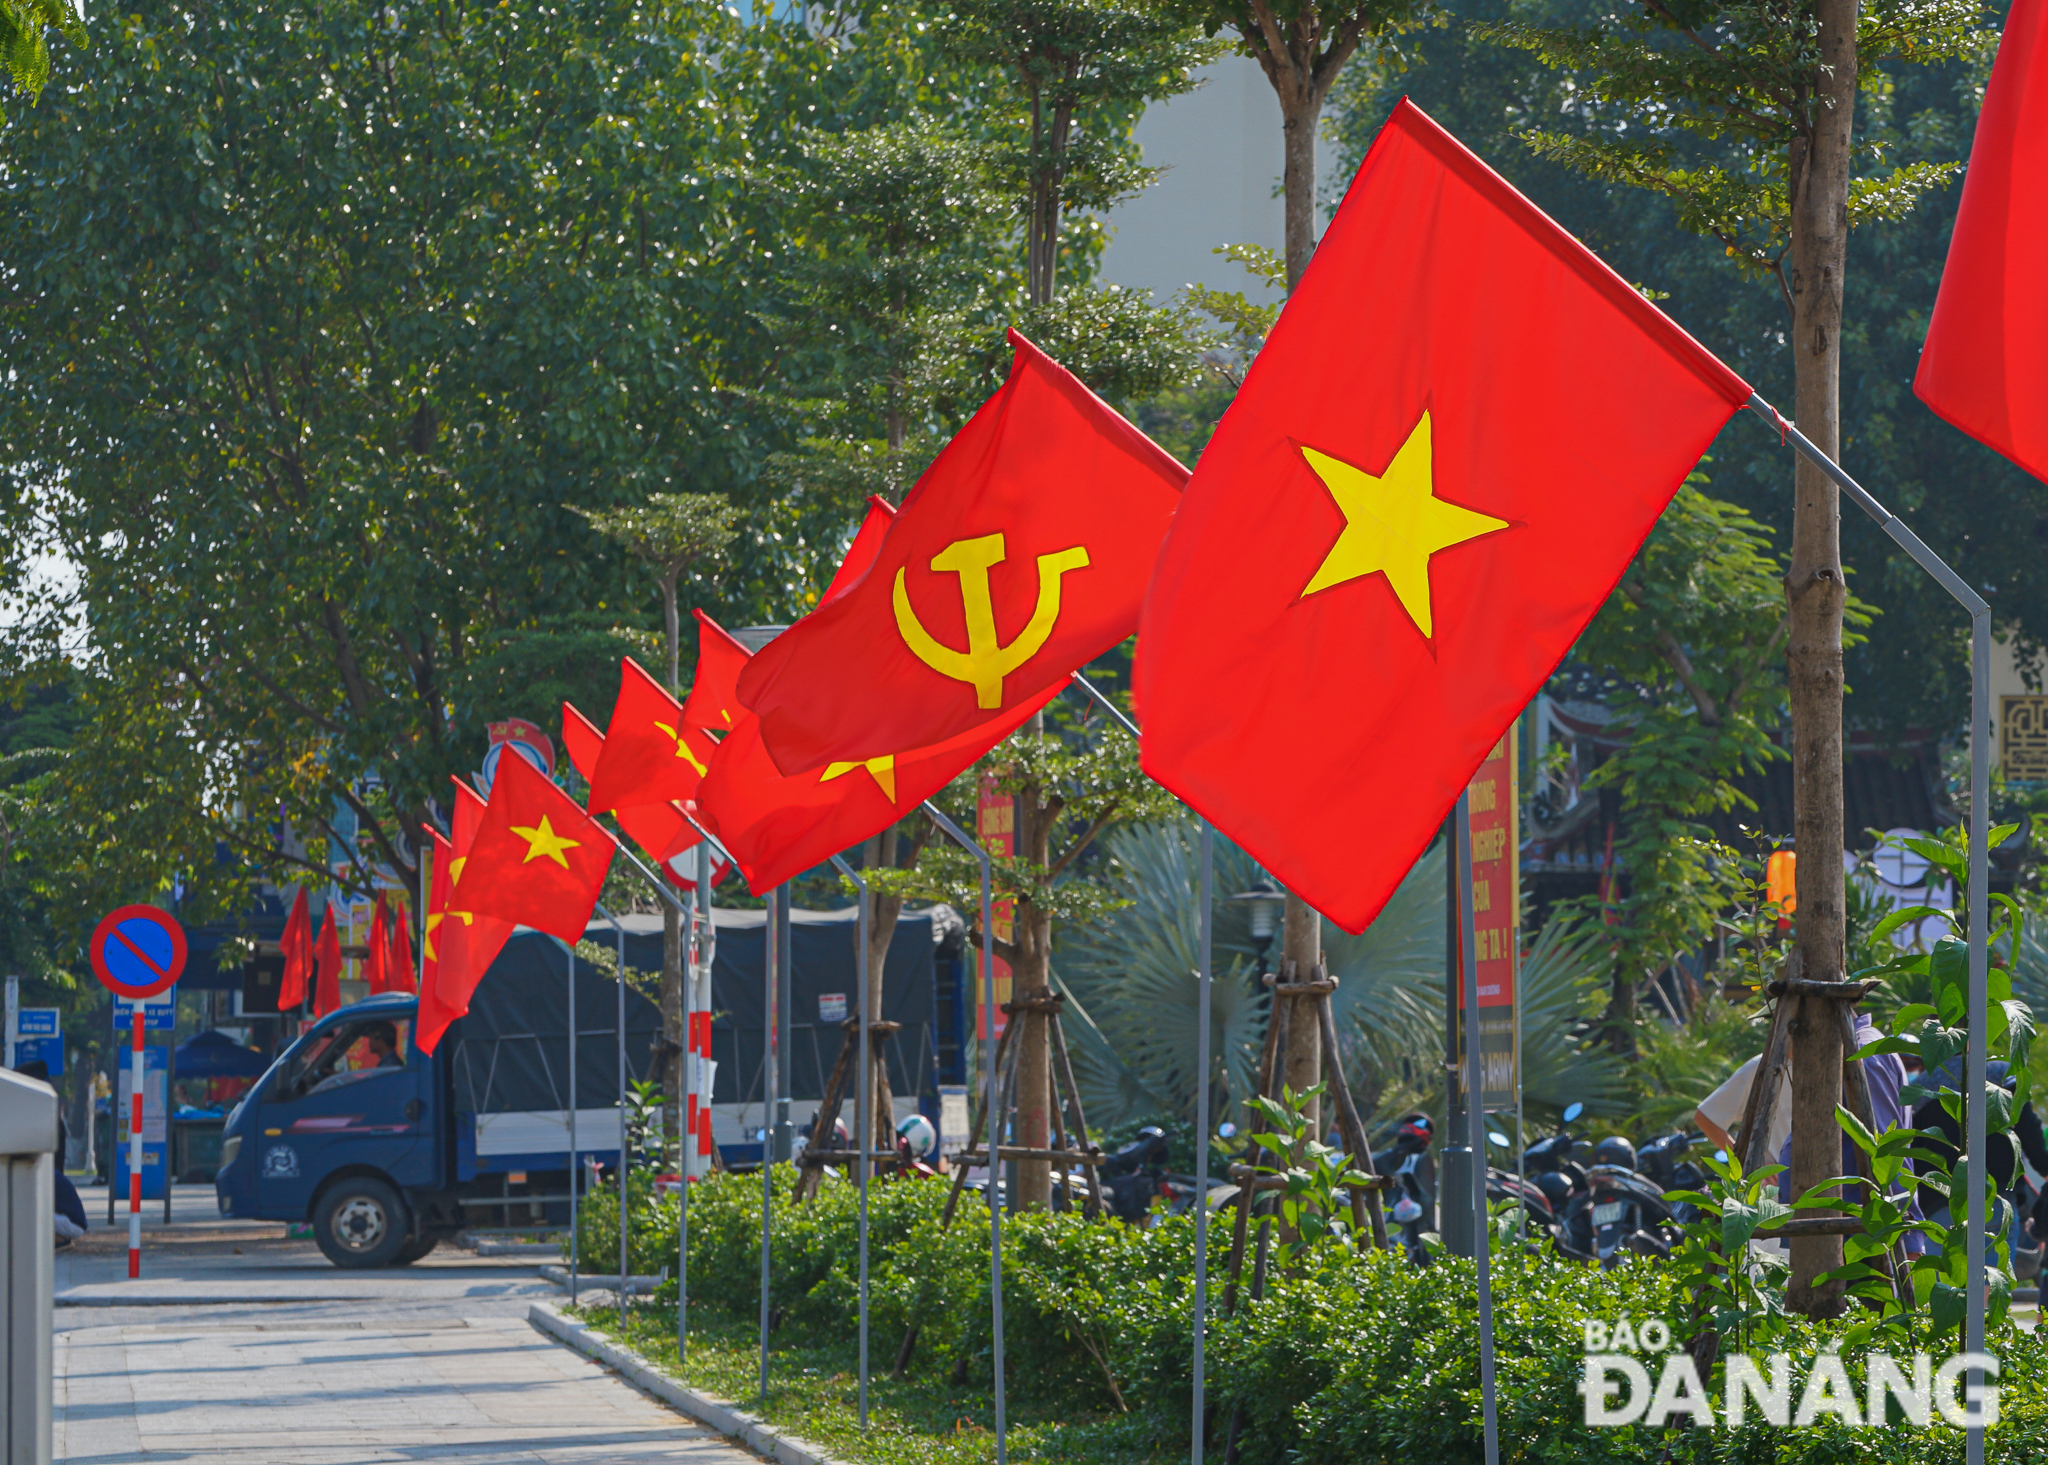 Red flags with yellow stars, and the Party's hammer and sickle flags, fly on every street corner